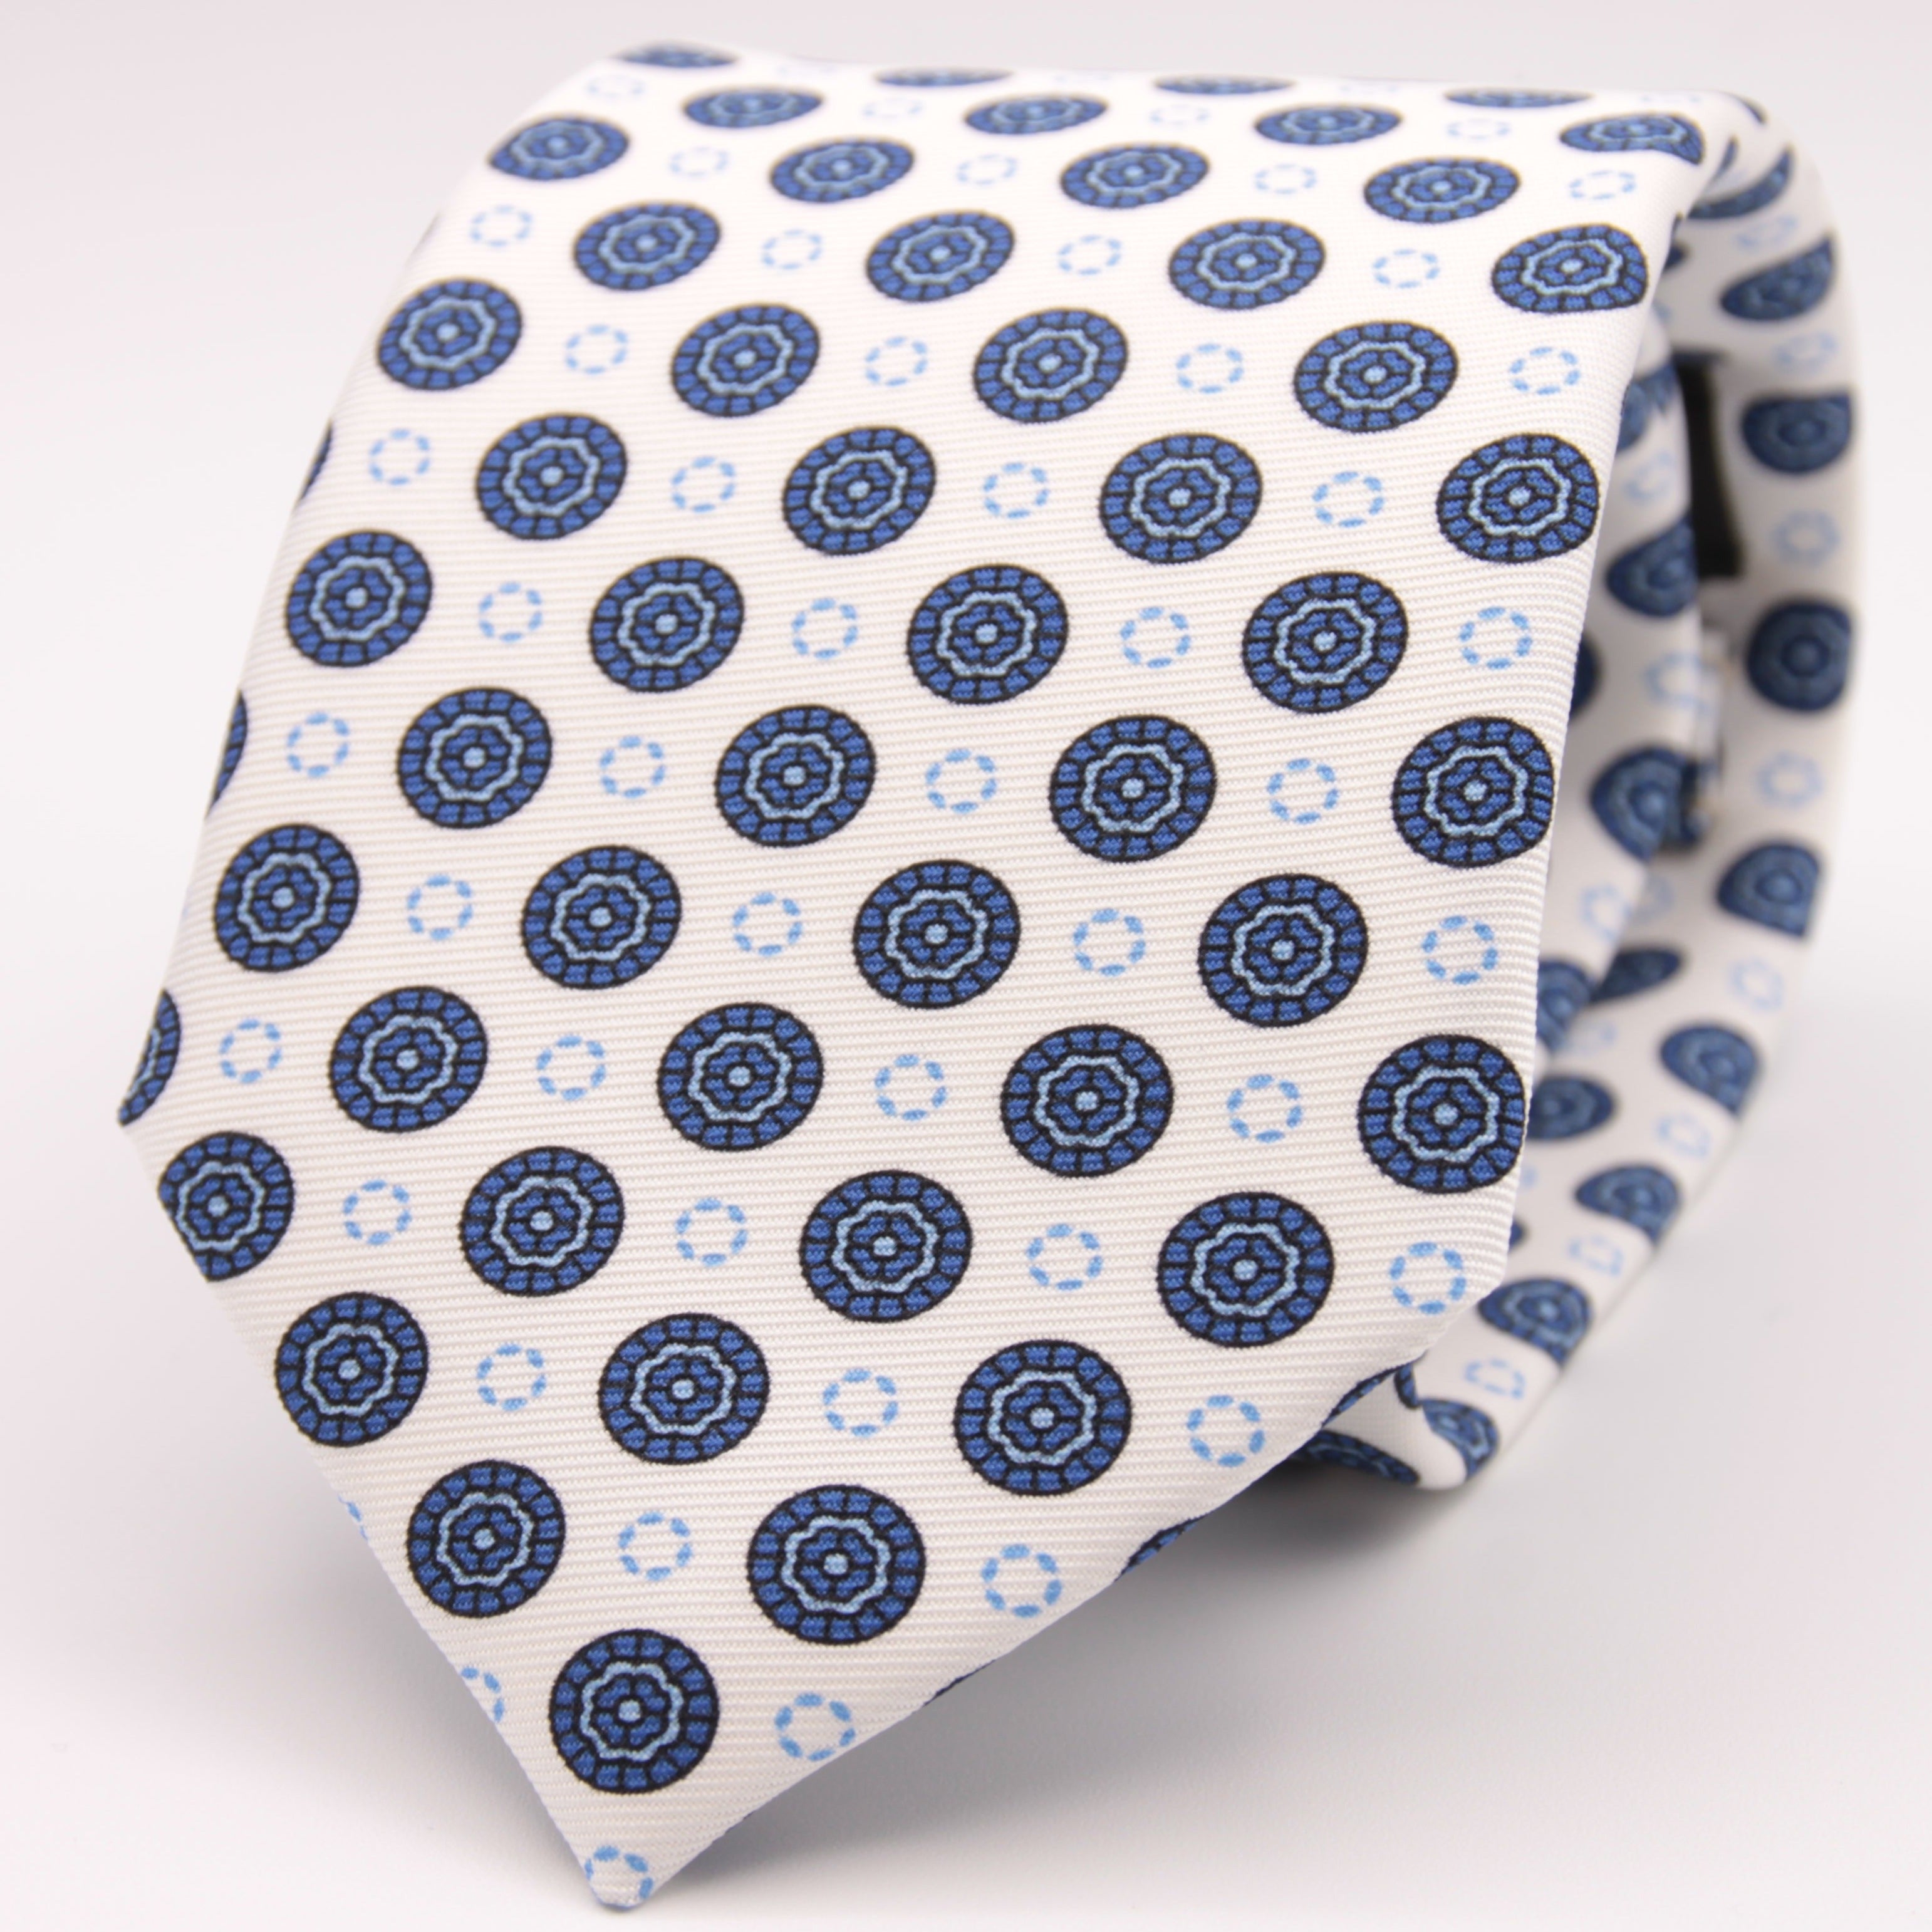 Holliday & Brown for Cruciani & Bella 100% printed Silk Self tipped White, Blue and Light Blue motif tie Handmade in Italy 8 cm x 150 cm #6329